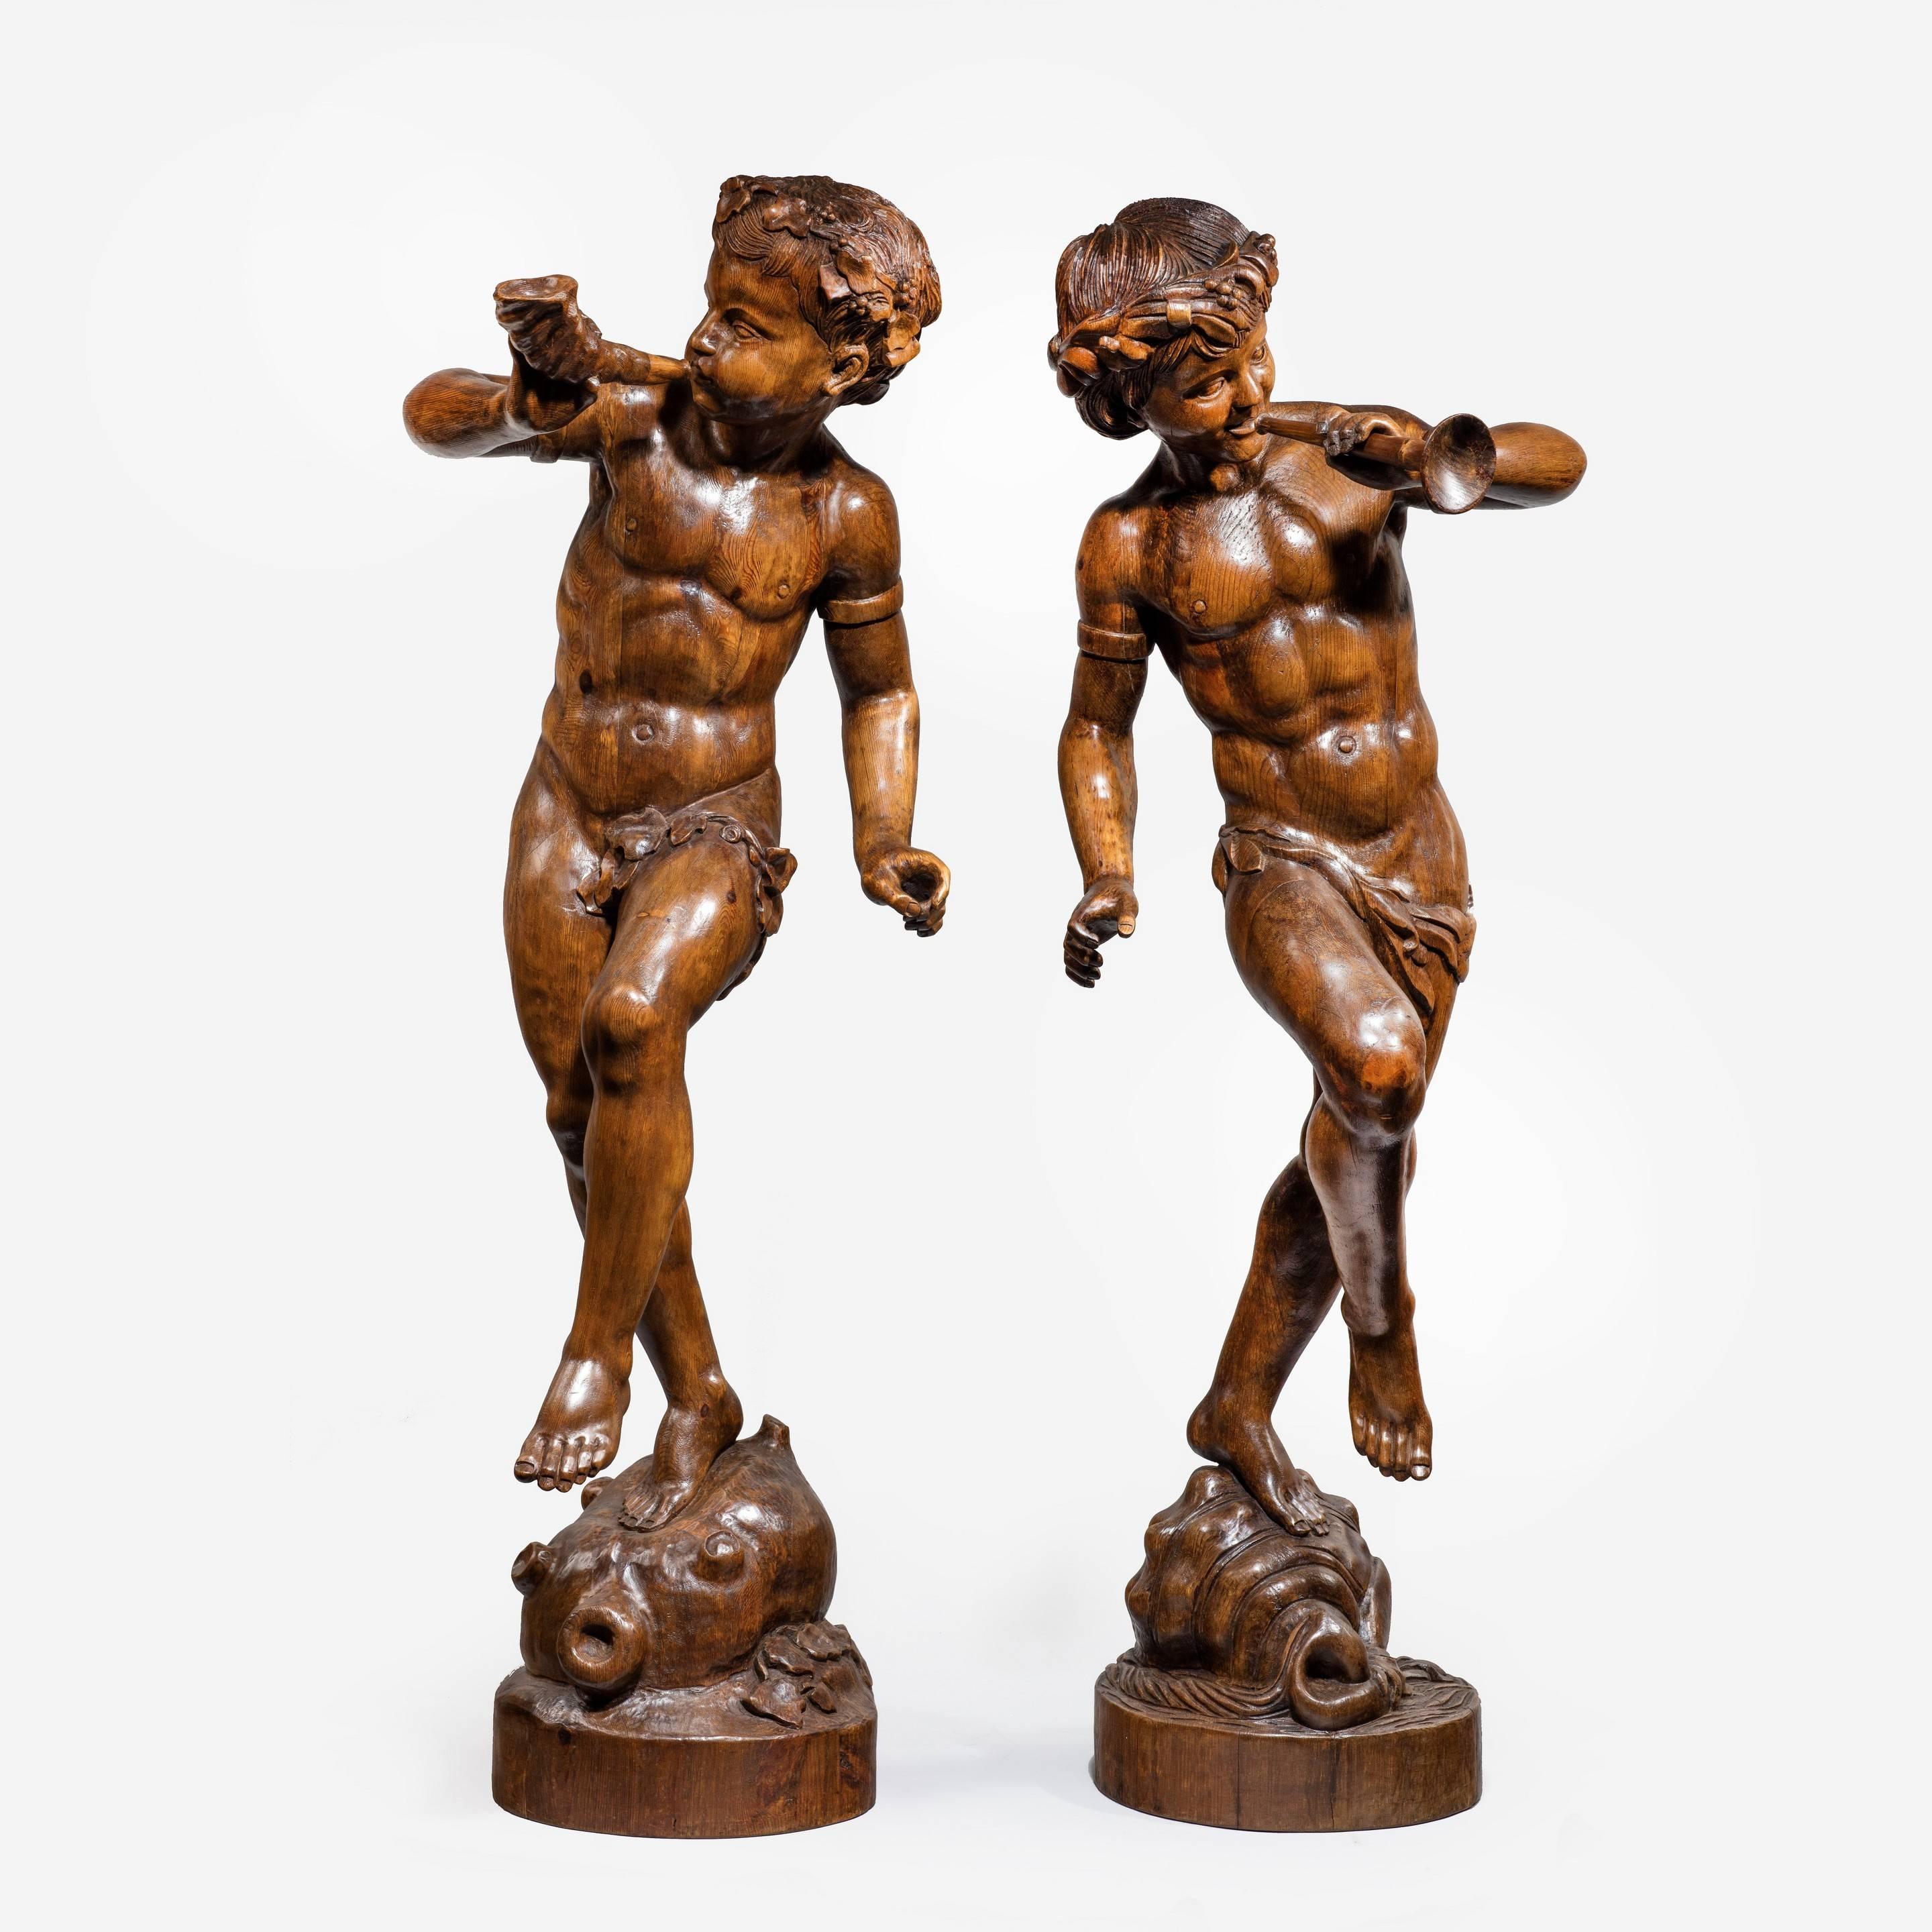 Two superb Italian pine Bacchanalian figures dancing with garlands in their hair,
one on a wine skin with a horn, the other on a shell with a trumpet.